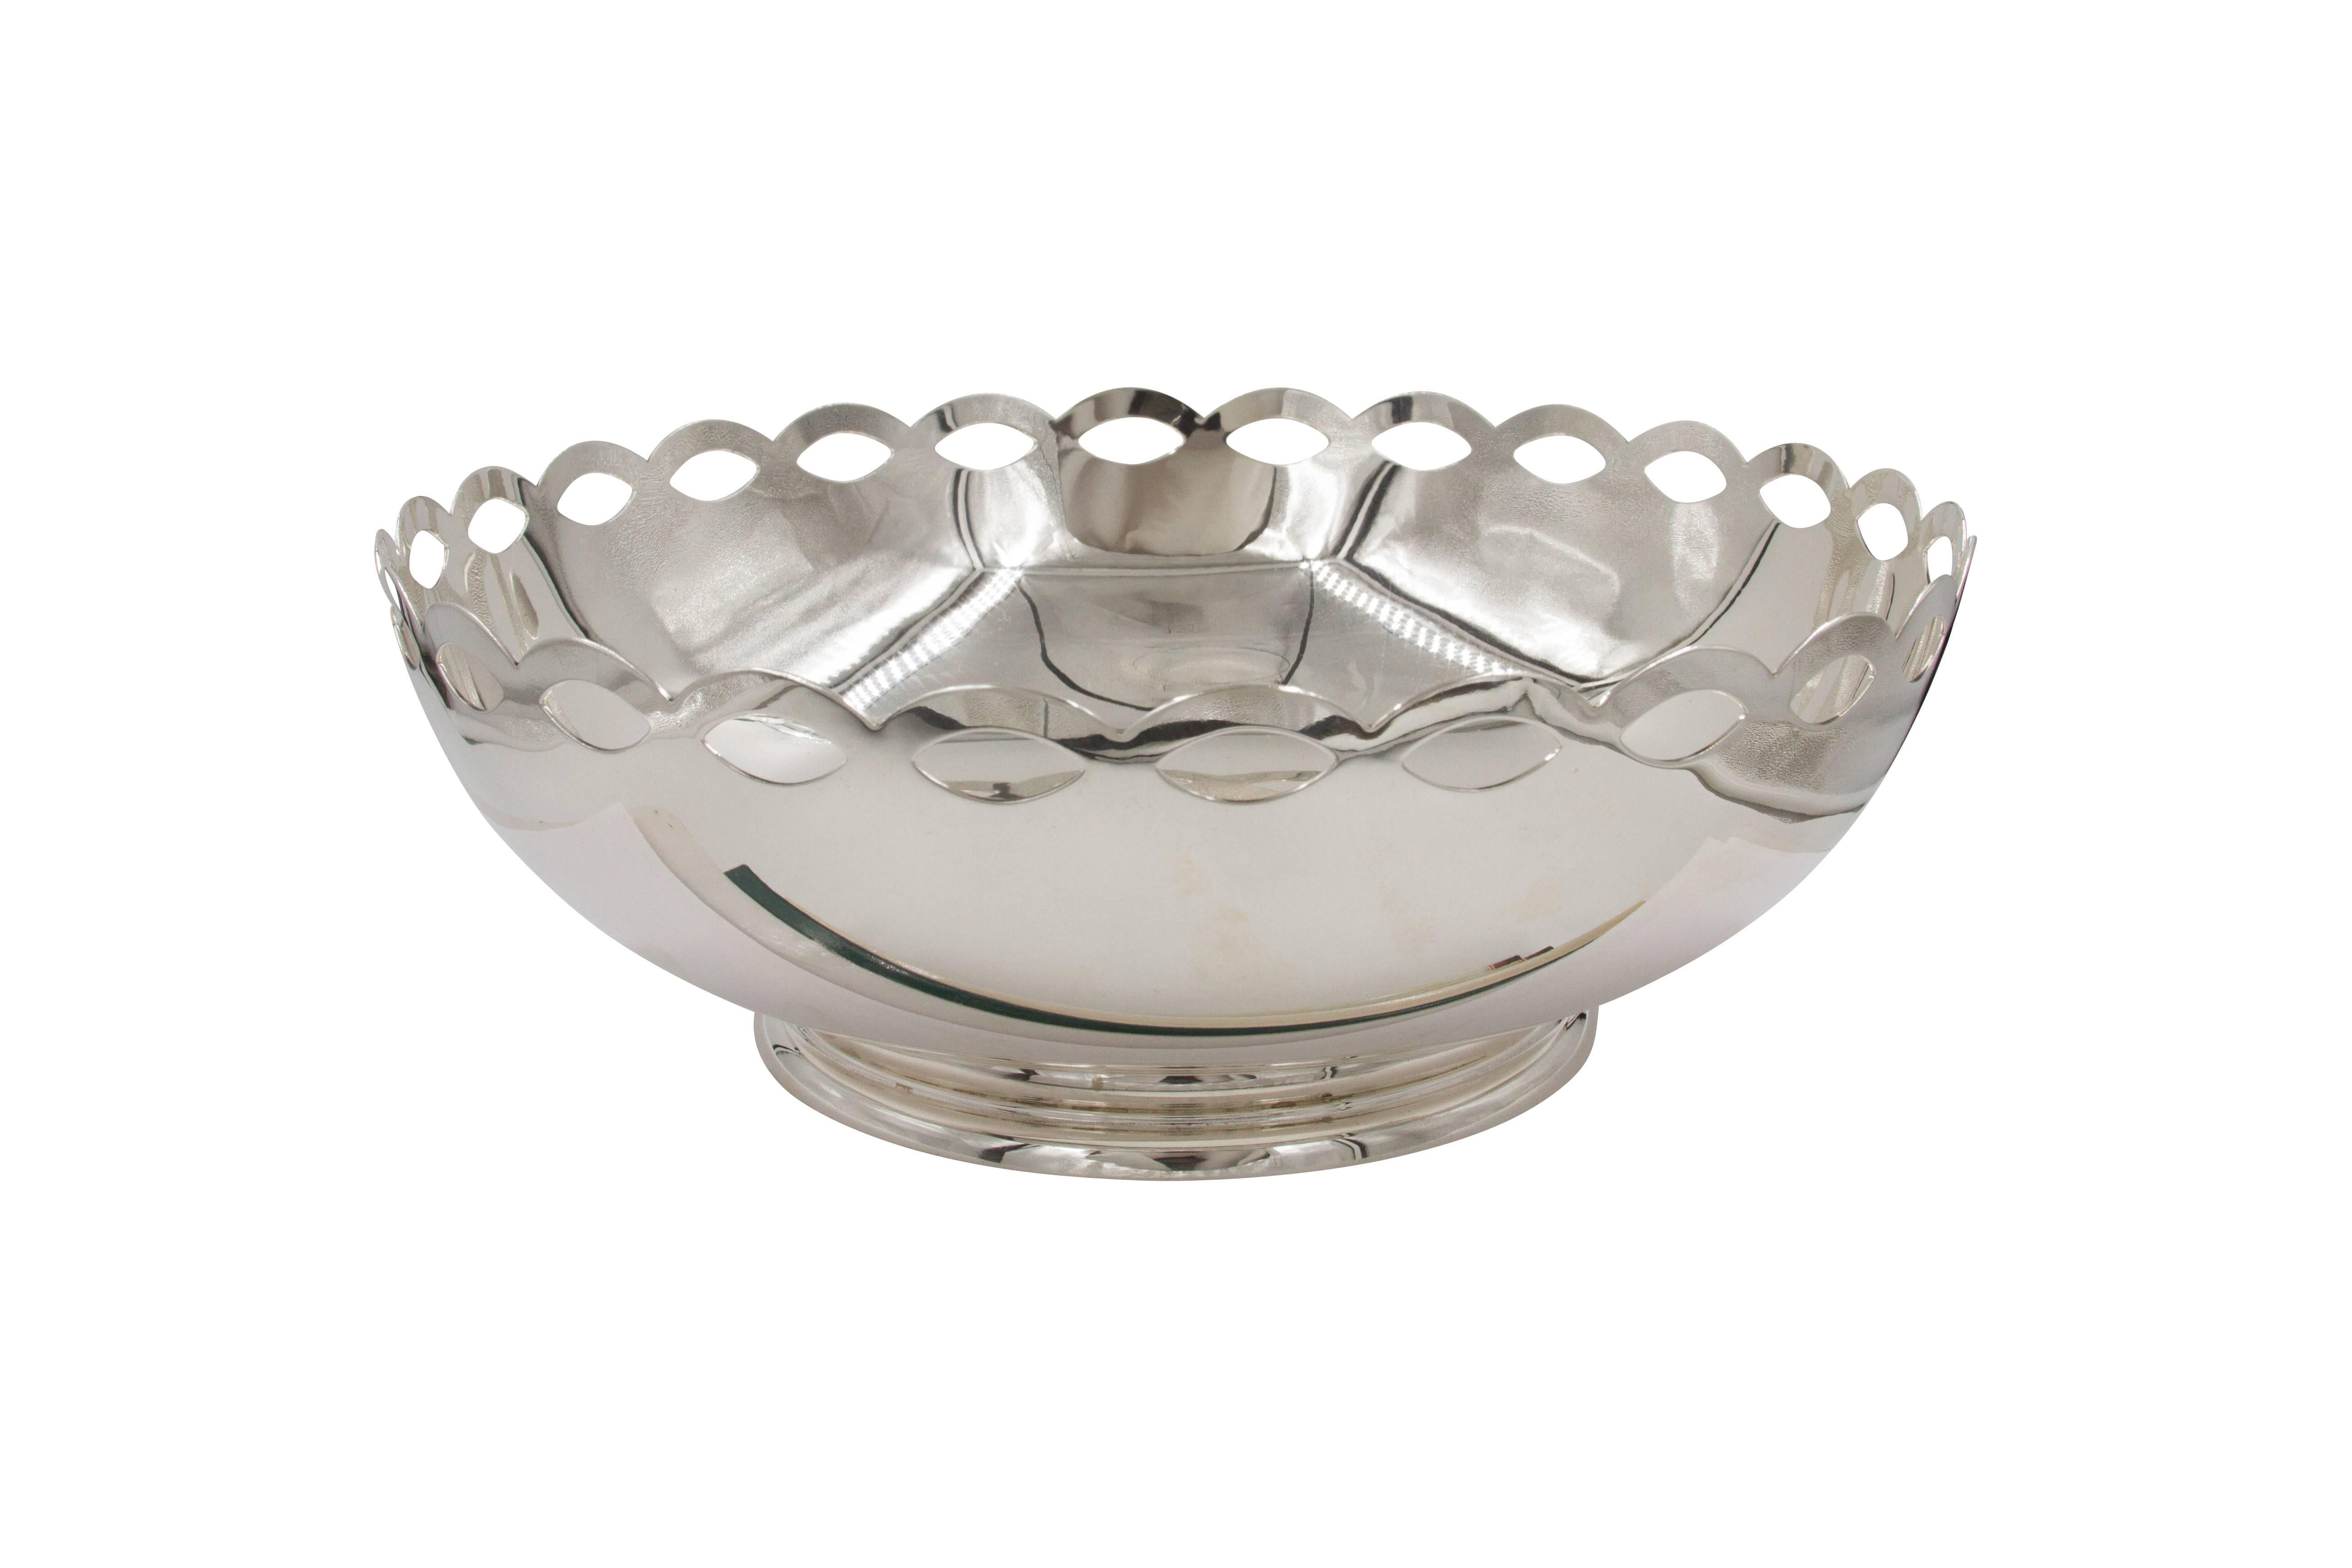 This bowl is the Quintessence of modernism and the very best of Mid-Century design. We love the symmetric cut-out pattern that wraps around the entire top. It gives this otherwise plain bowl a real sharp and handsome look!